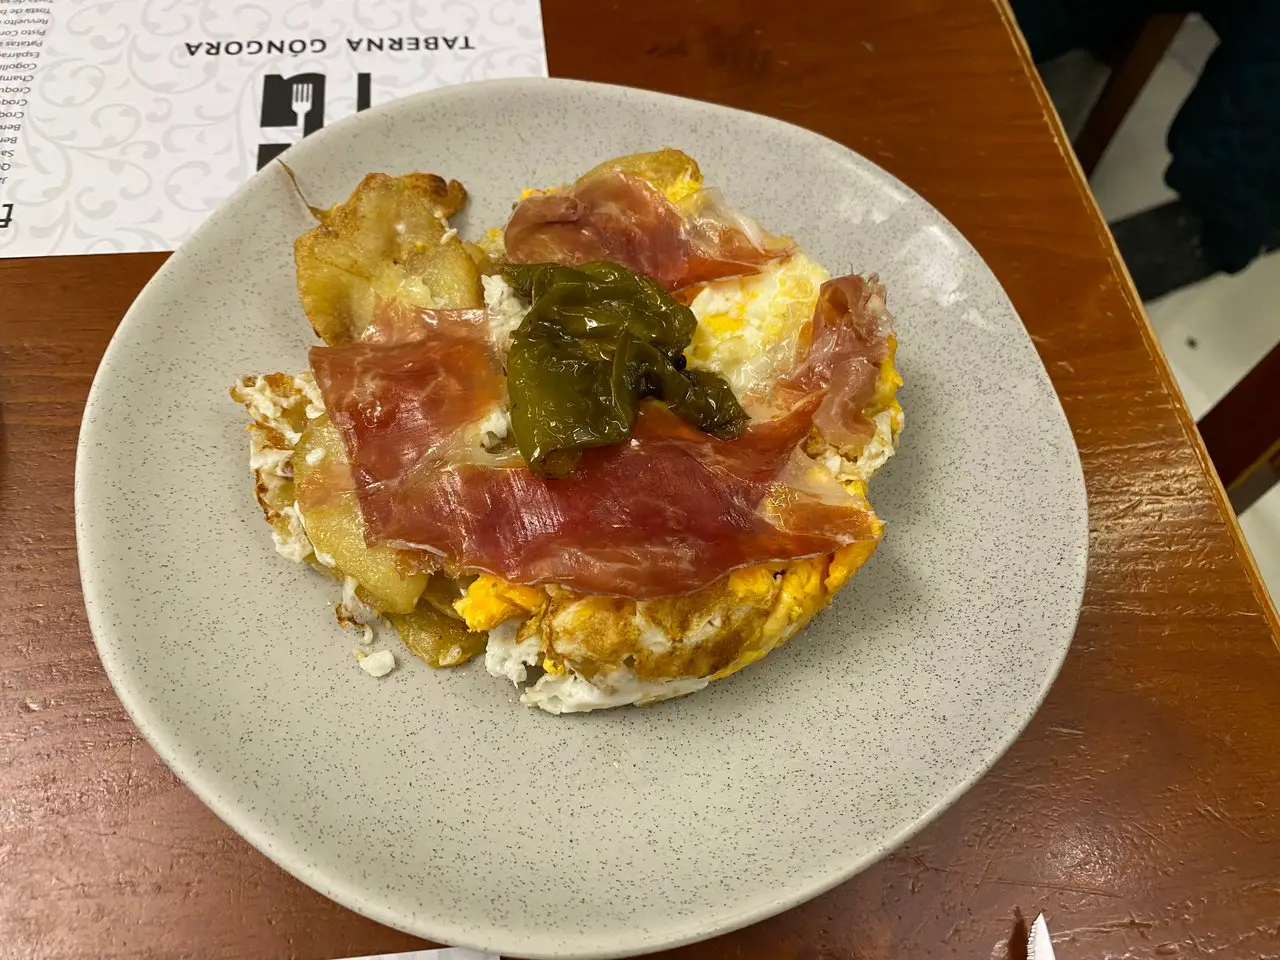 A potato, egg and cured ham dish on a plate.